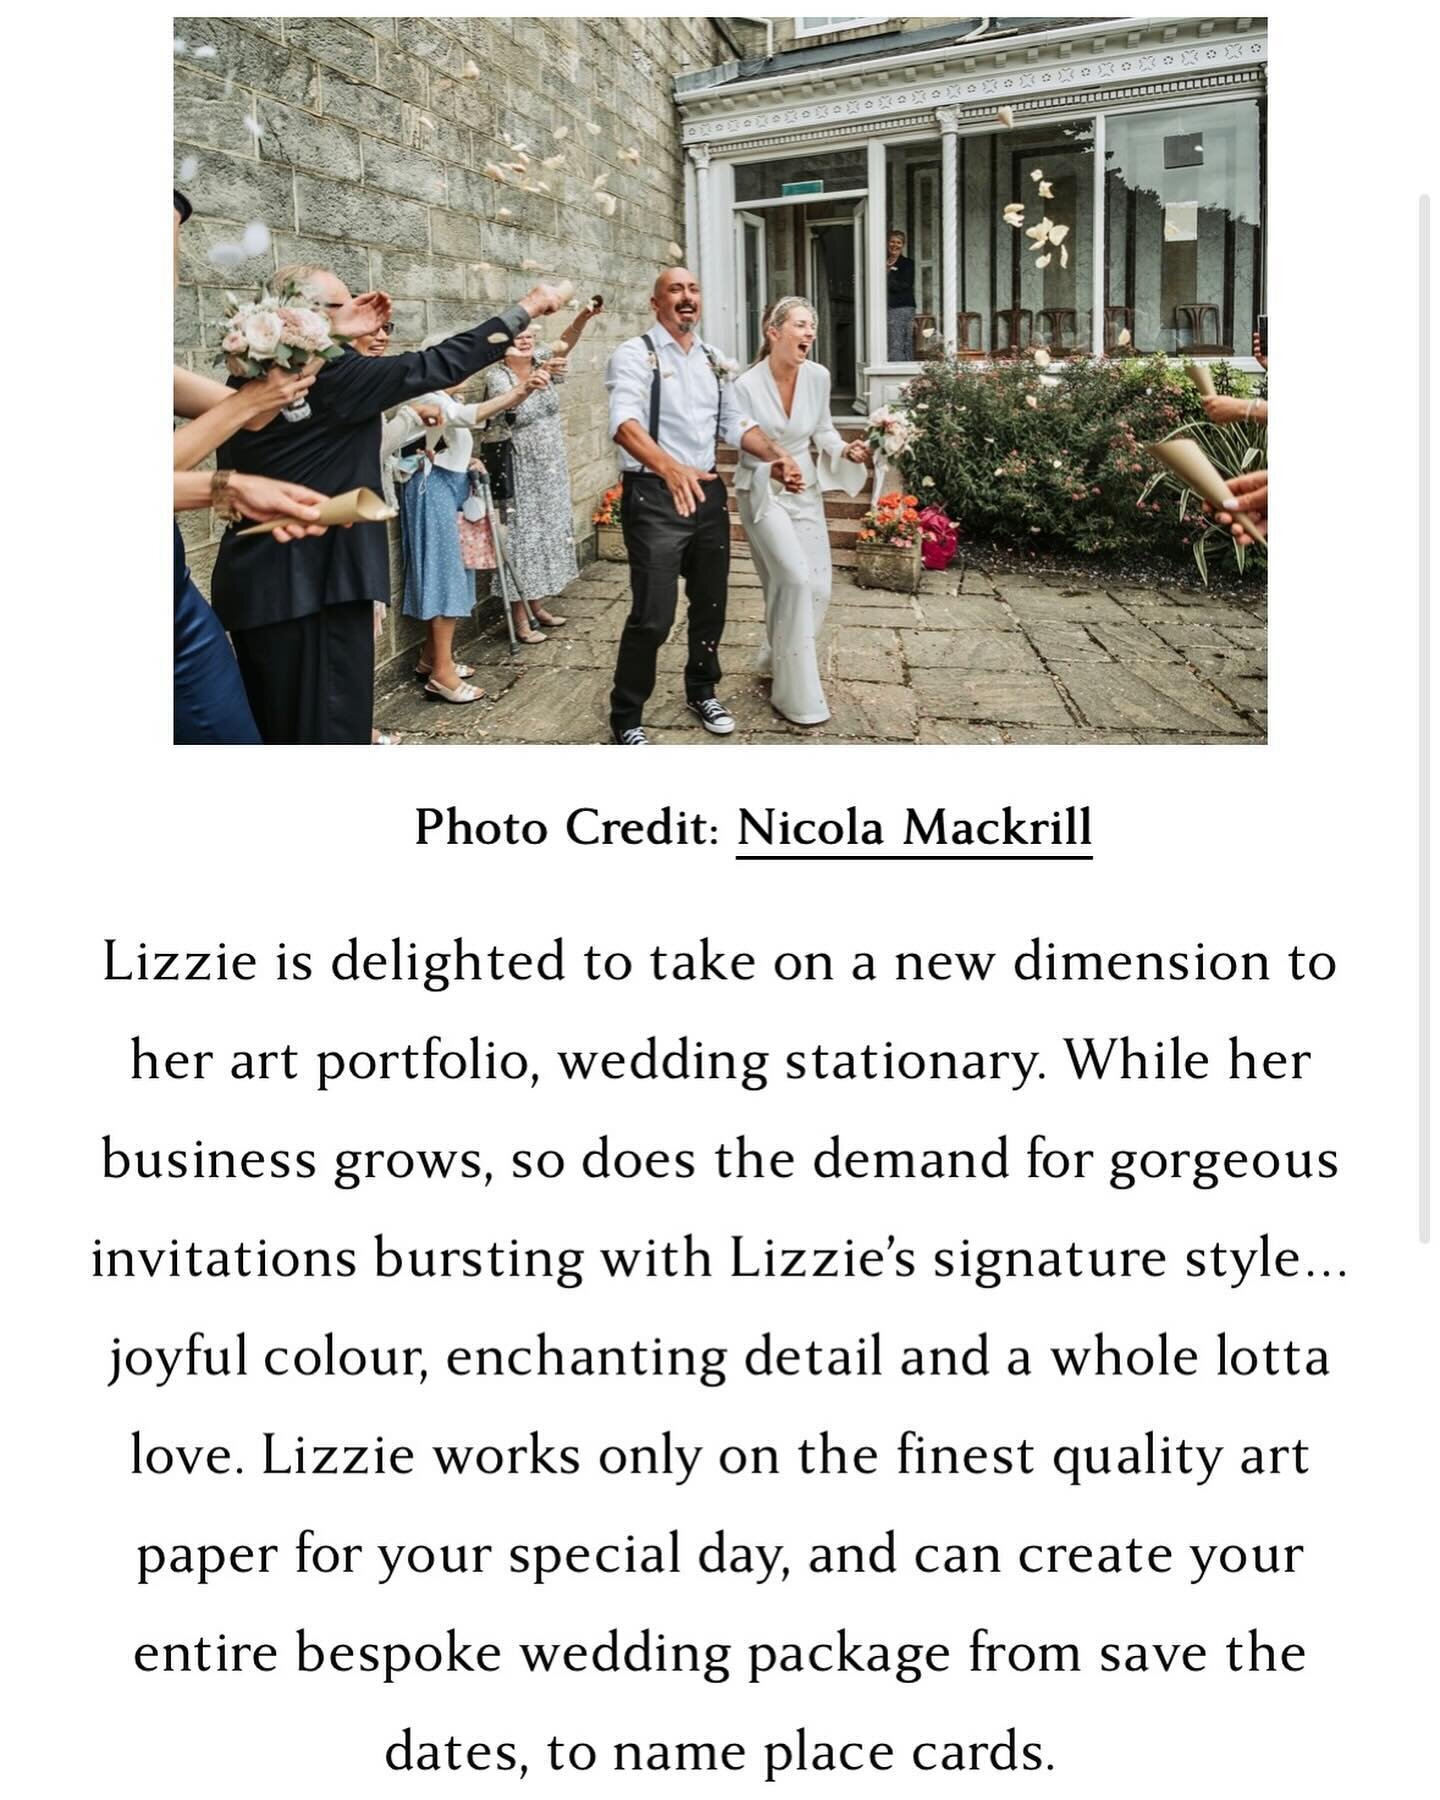 💕 🔔Special Announcement! 🔔 💕

Share the news with your friends and family. It&rsquo;s officially official and I&rsquo;m so excited 🥰

〰️

#weddingstationery #bespokewedding #bespoke #invitations #weddingday #savethedate #weddingpackage #commissi